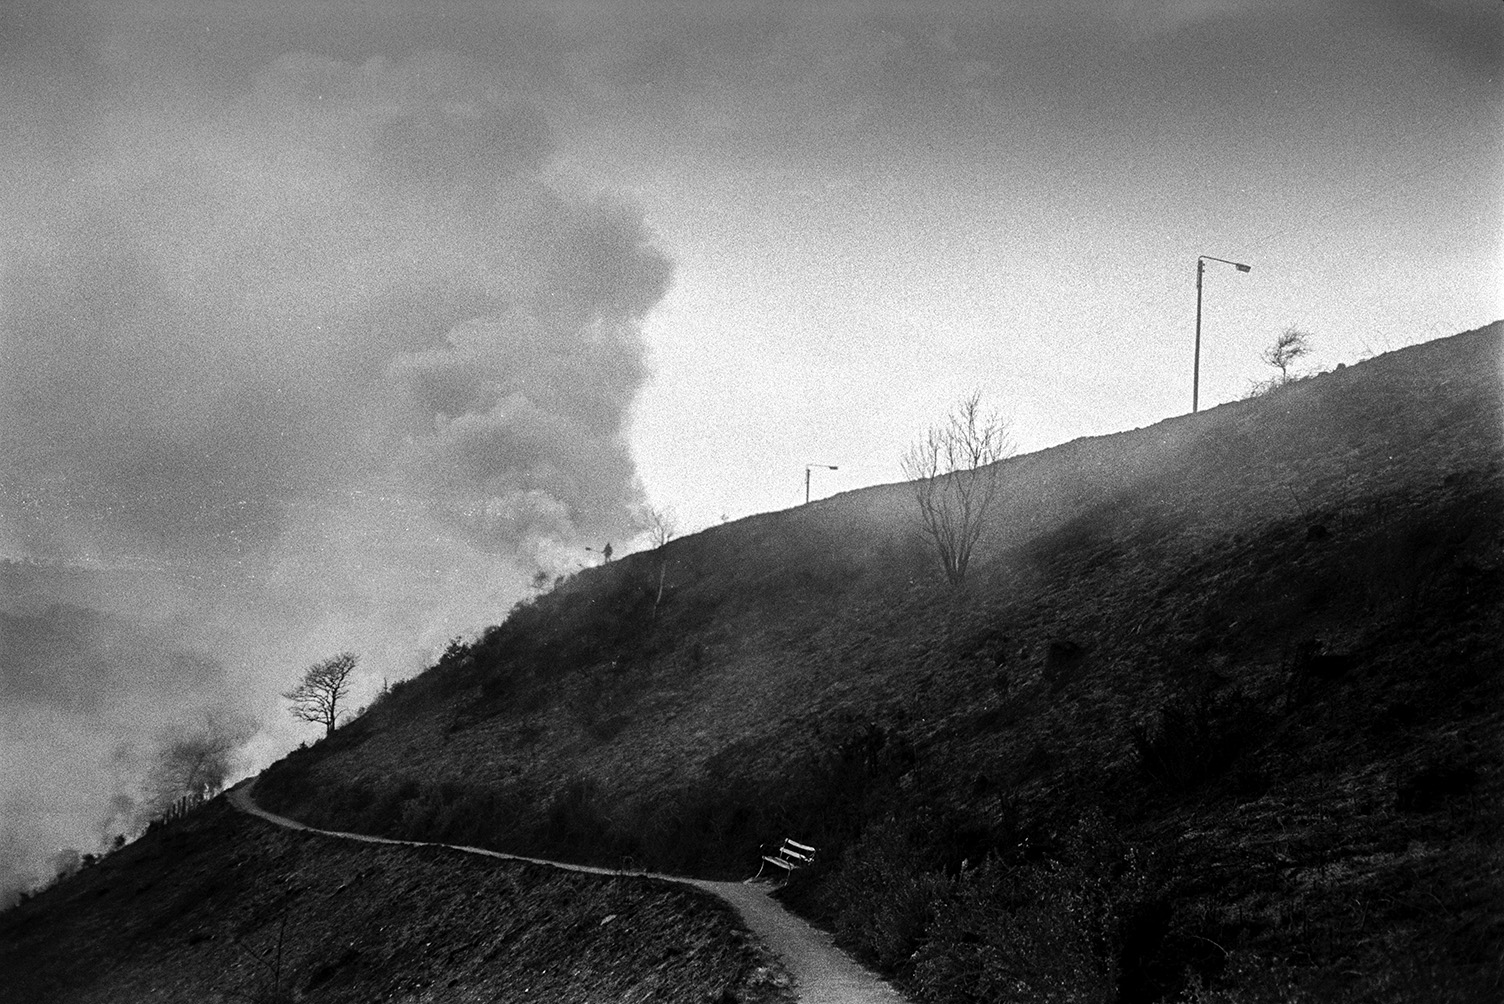 Smoke rising from Torrington Hill from the burning of surface brambles. A footpath and bench are visible on the hillside in the foreground.